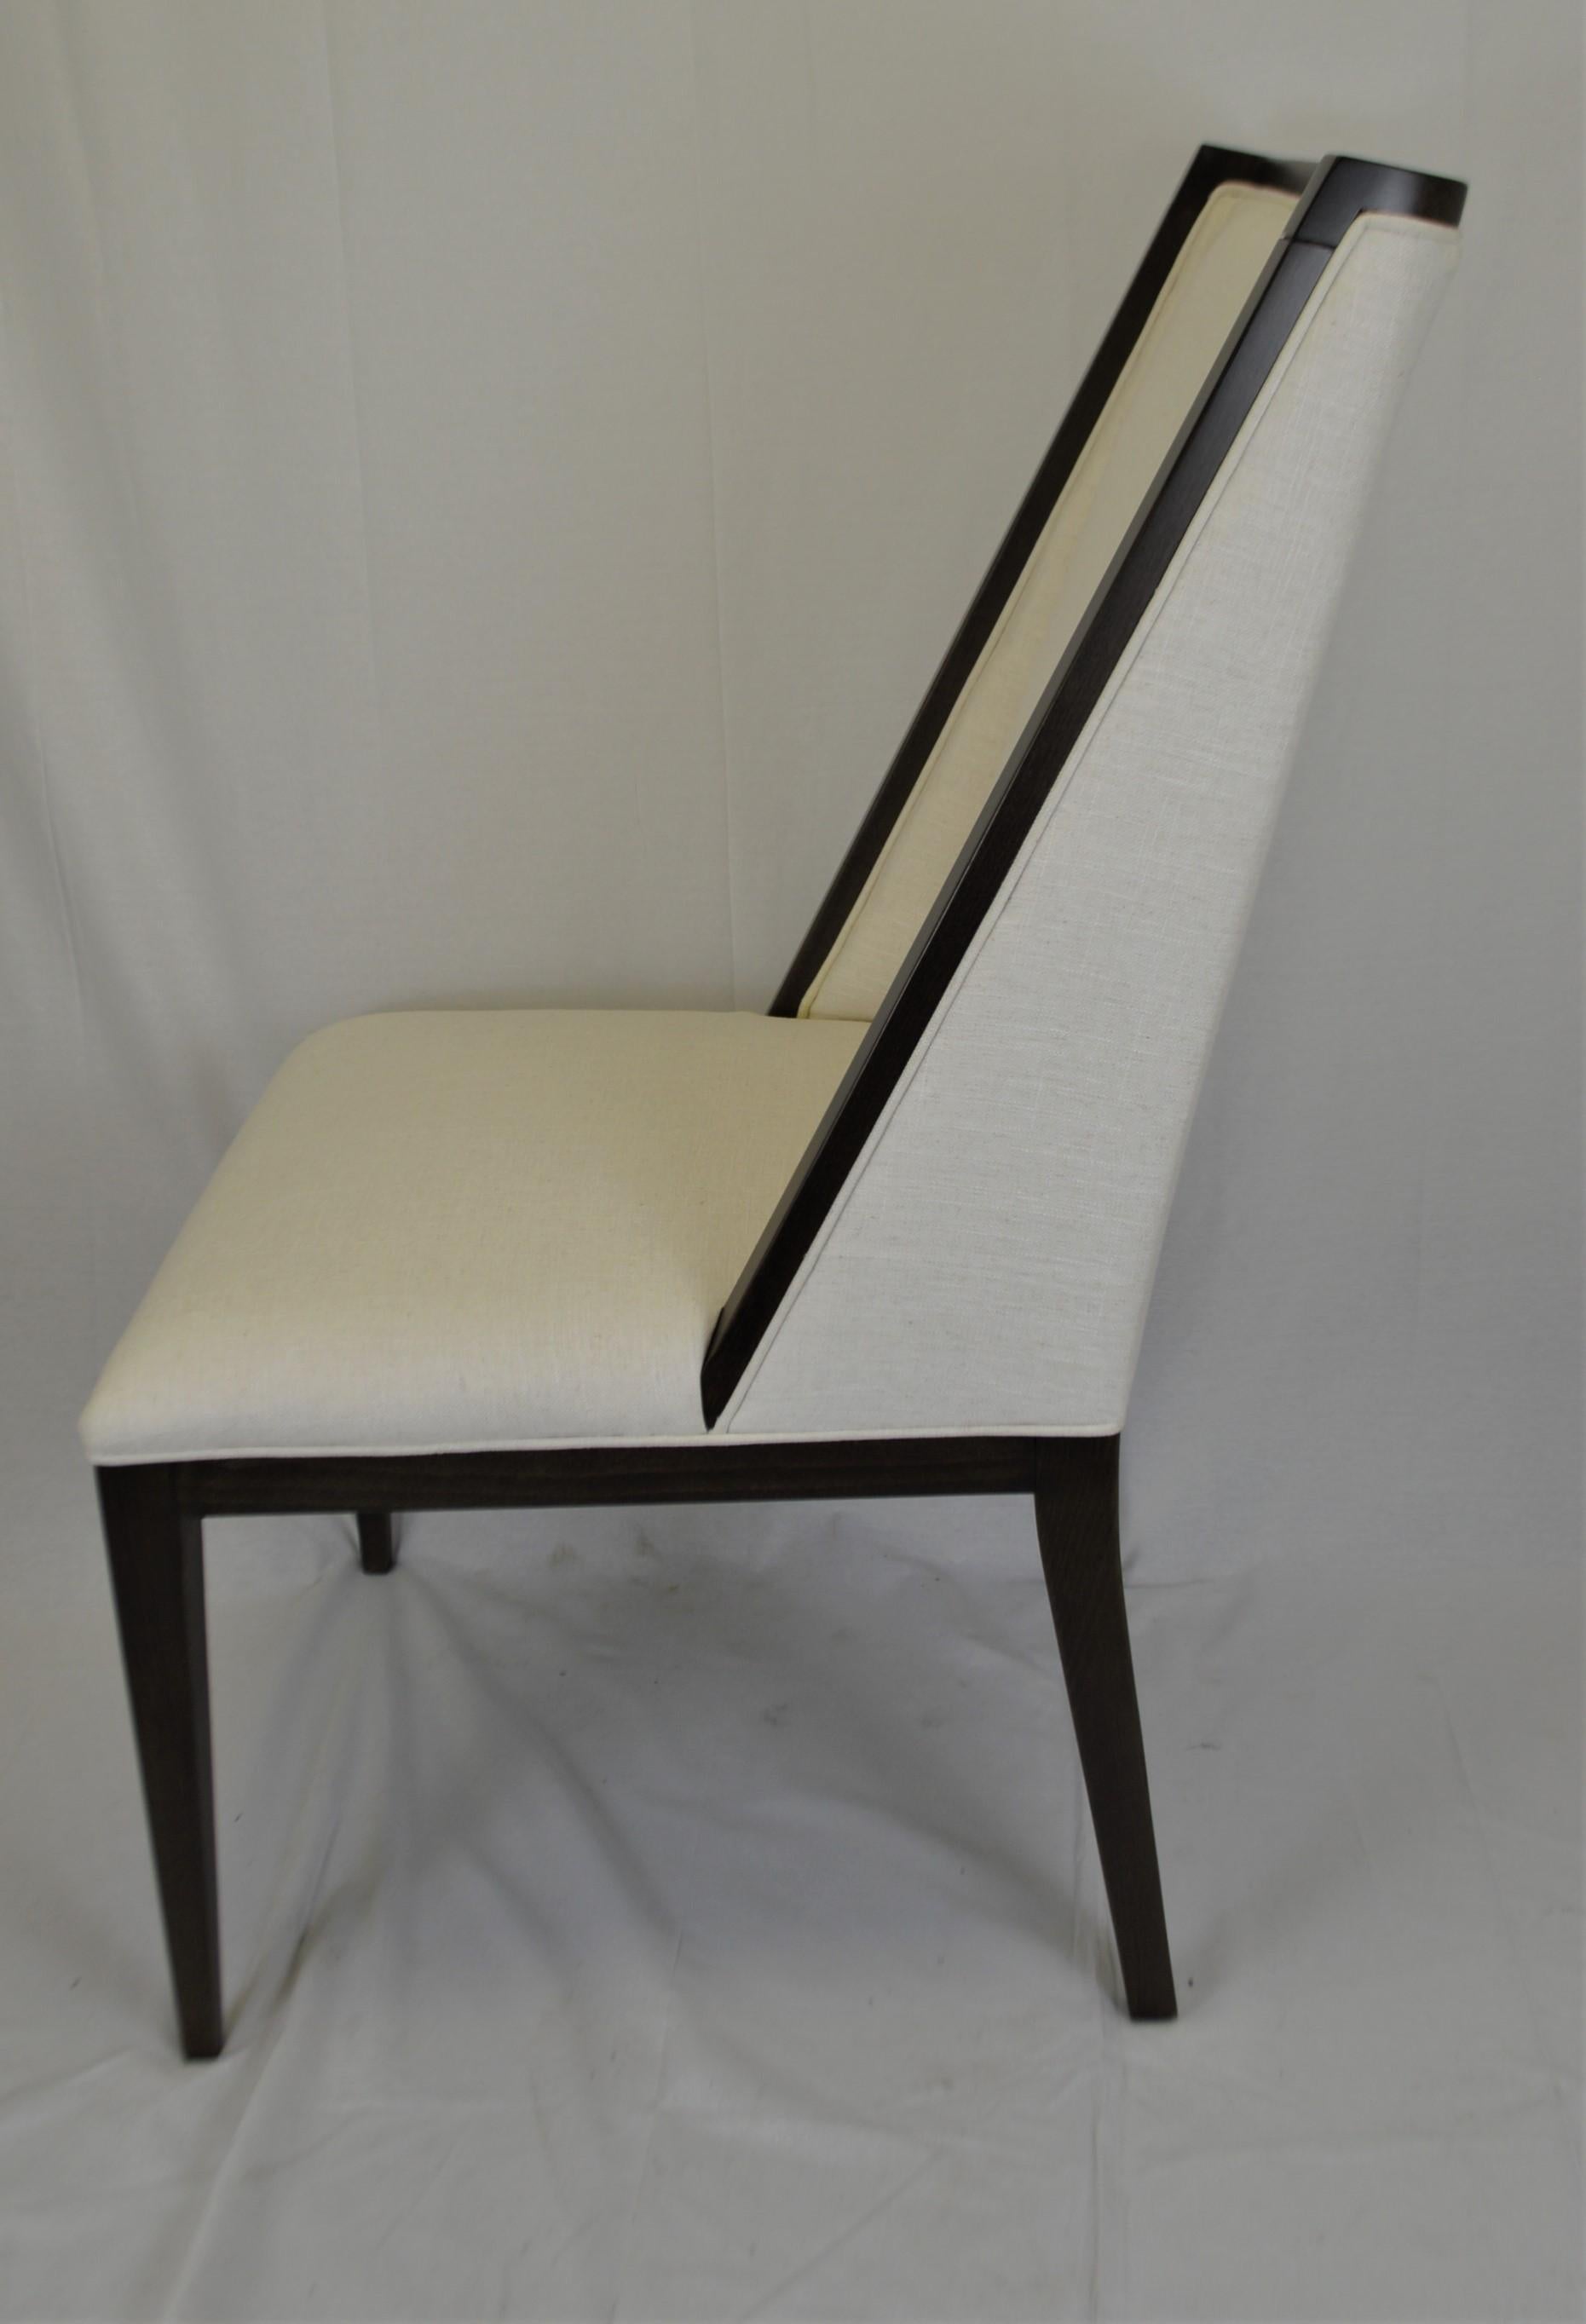 This modern chair is attractive and generous in size. The frame is made in Italy and the frame can be custom finish, it is showing here in a black paint finish.
We offer custom upholstery with your fabric.